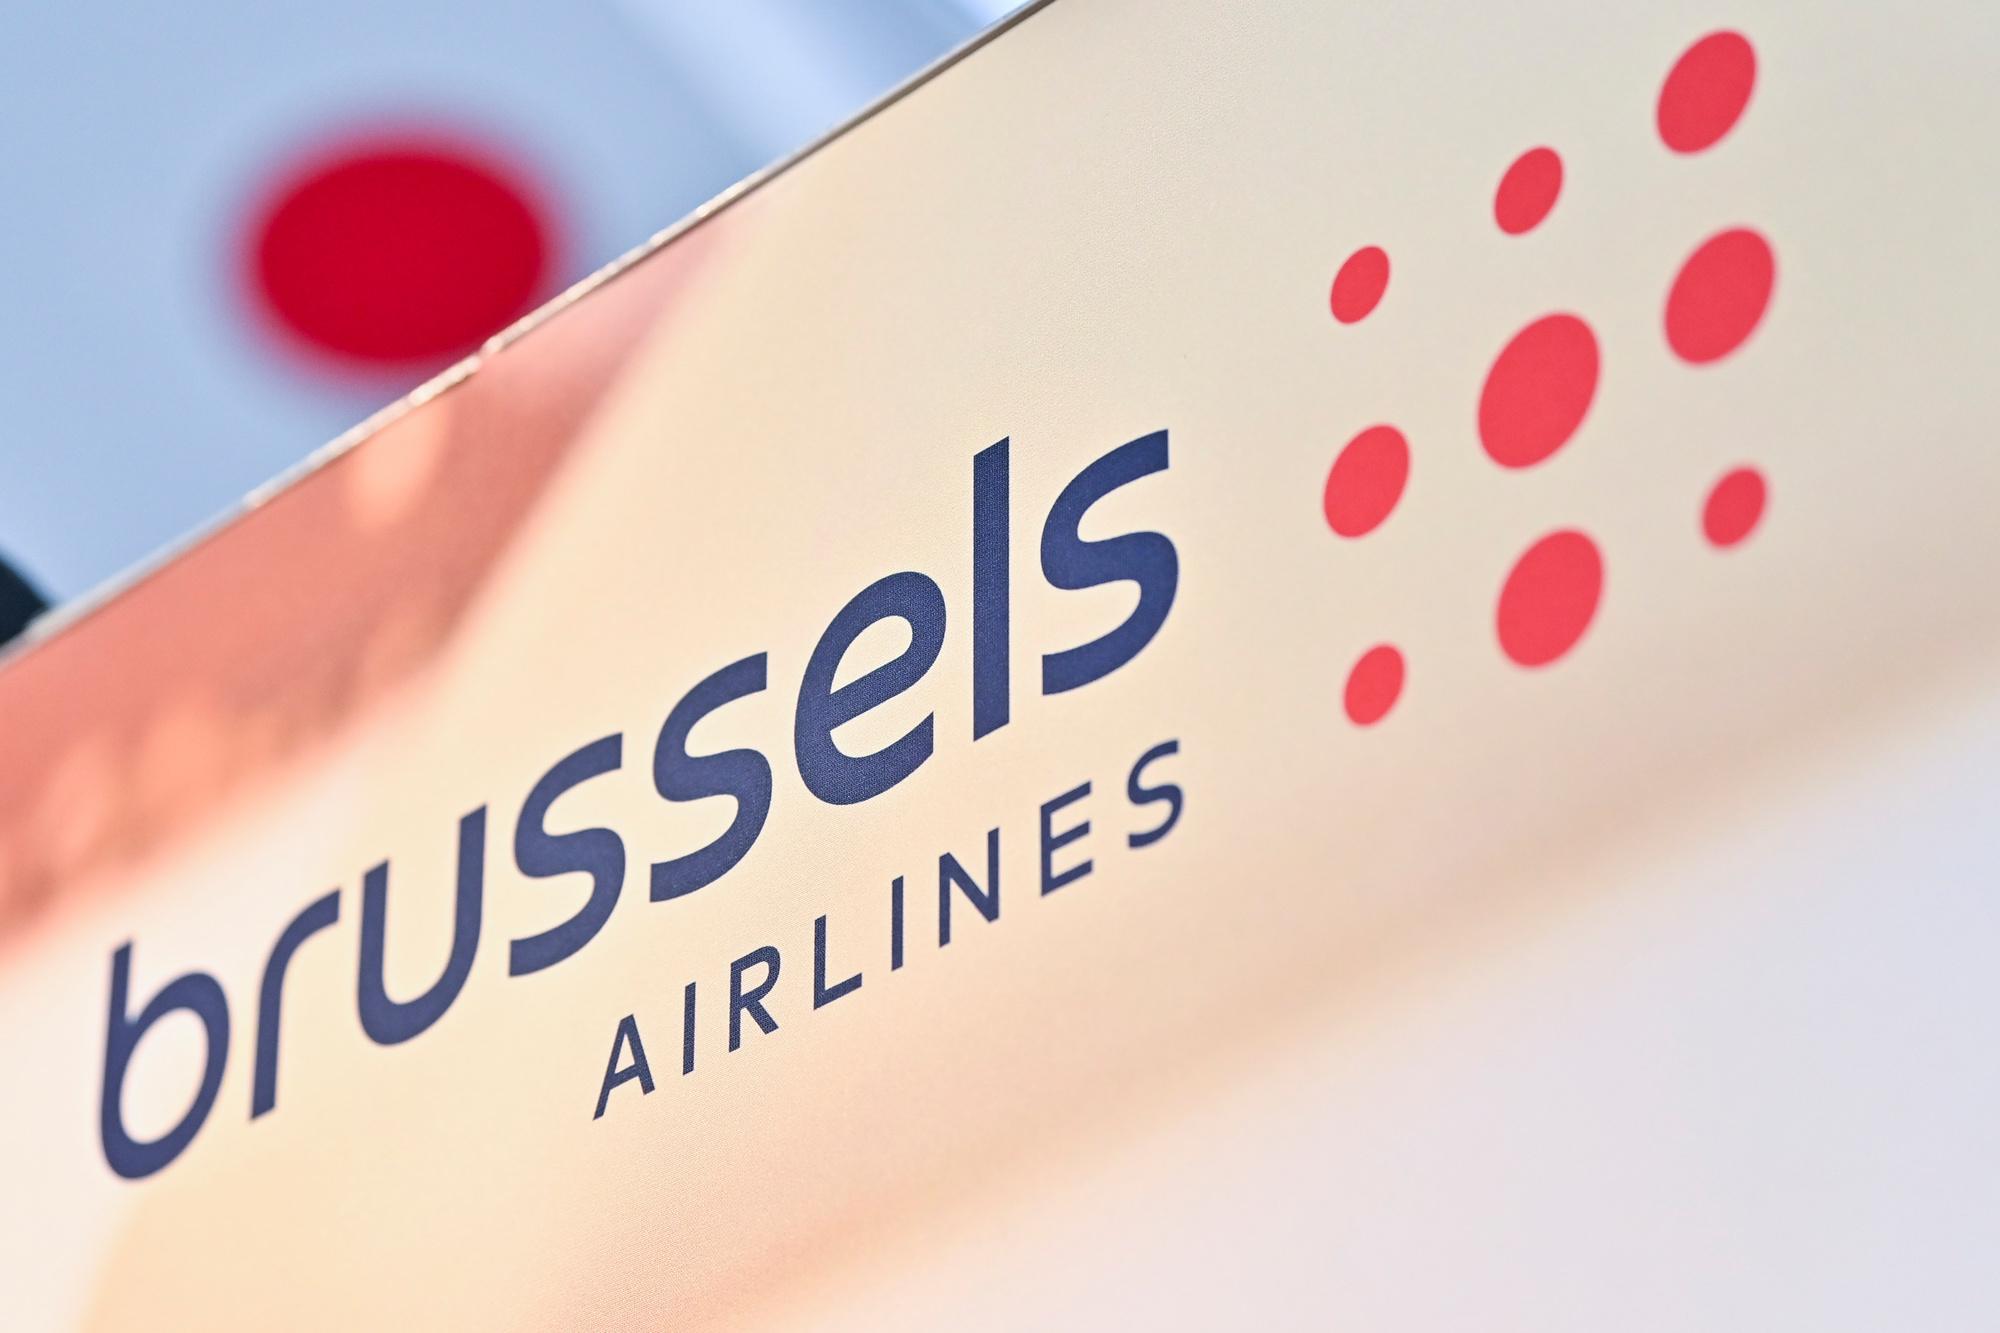 Brussels Airlines souffle ses 20 bougies